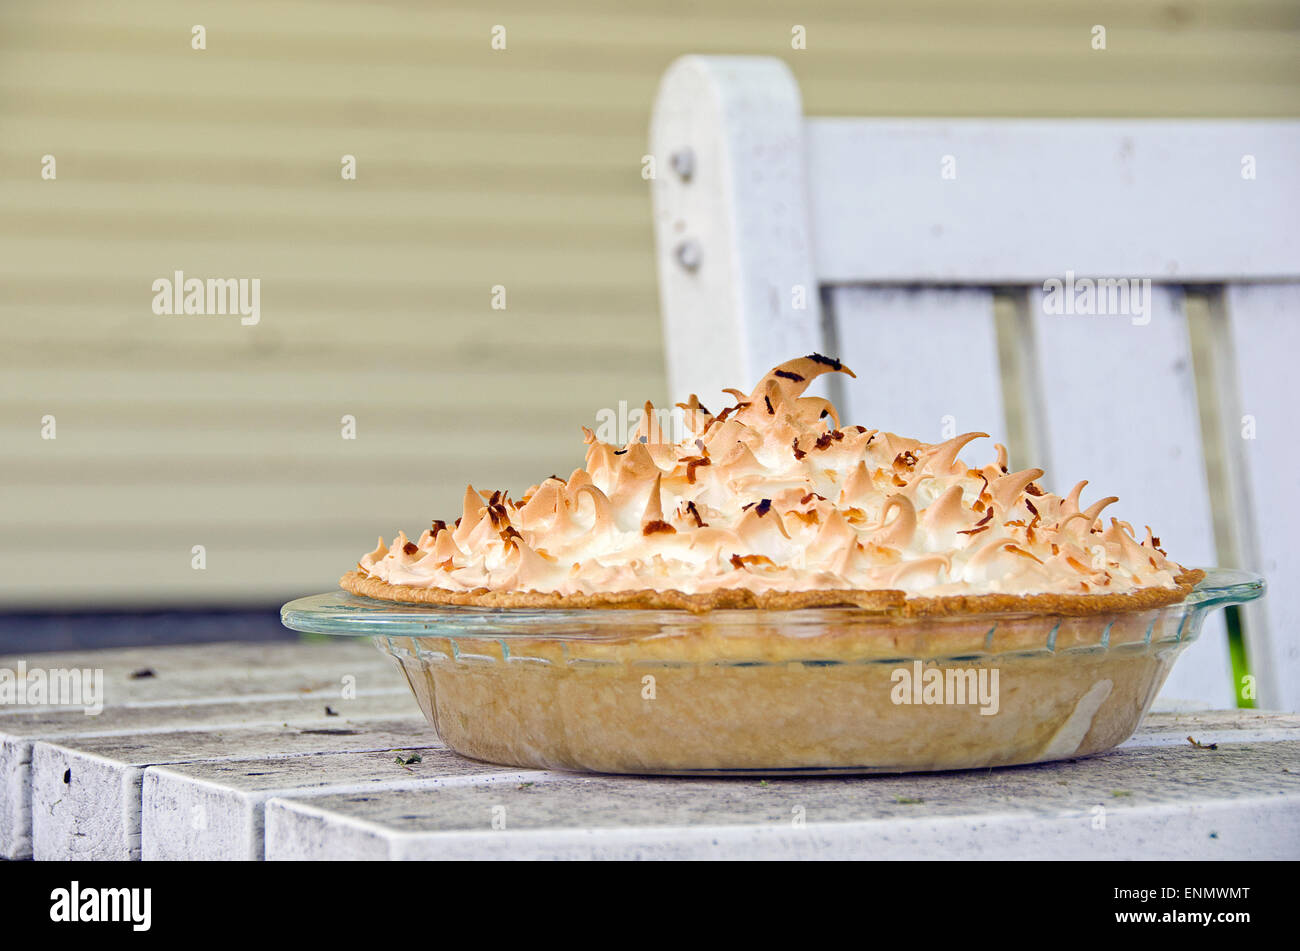 Homemade coconut cream pie on an outdoor table. Stock Photo